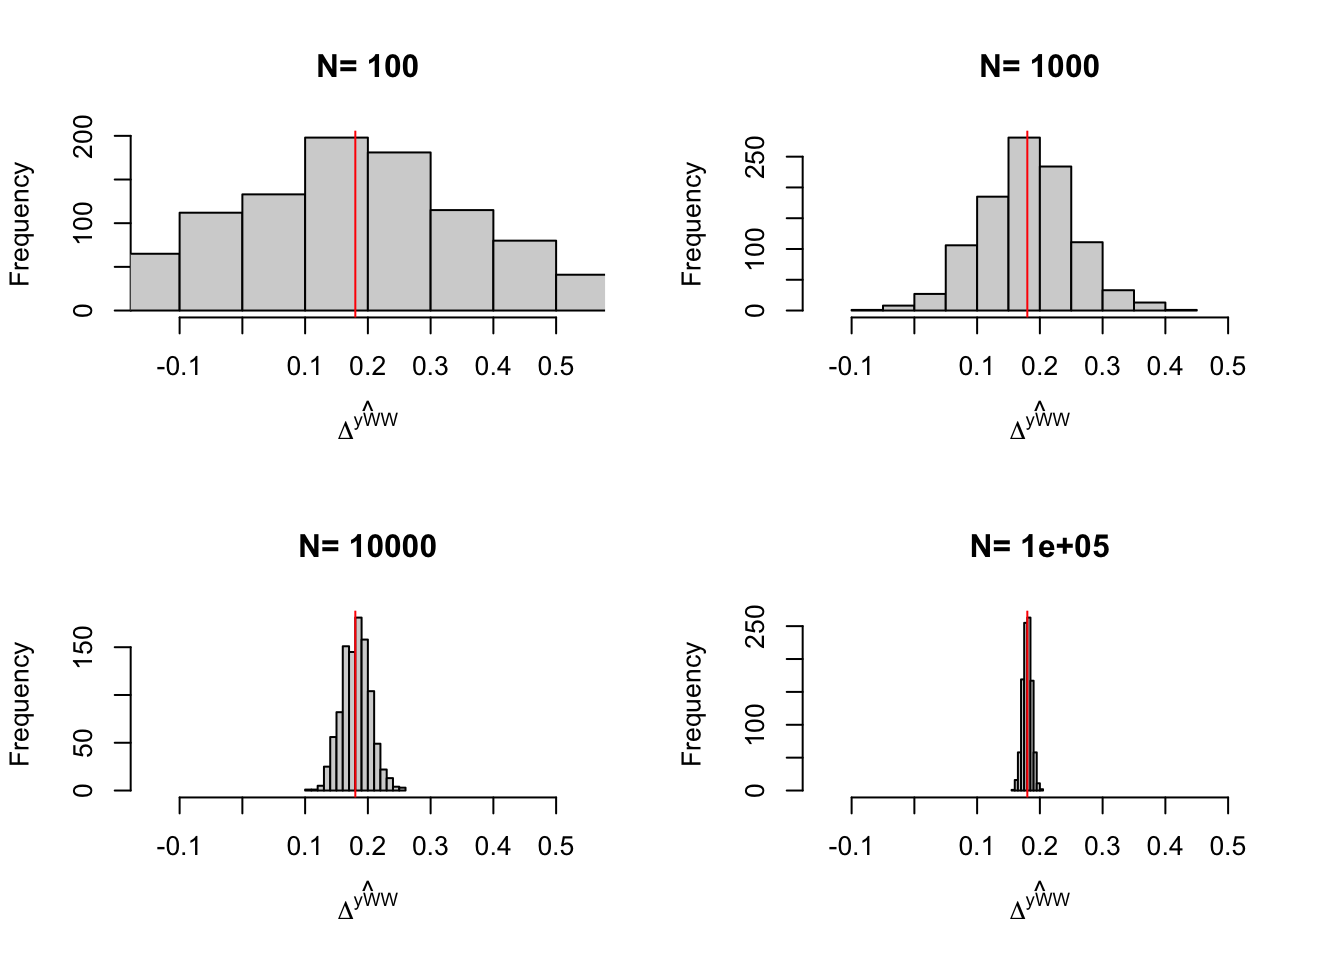 Distribution of the $WW$ estimator over replications of samples of different sizes